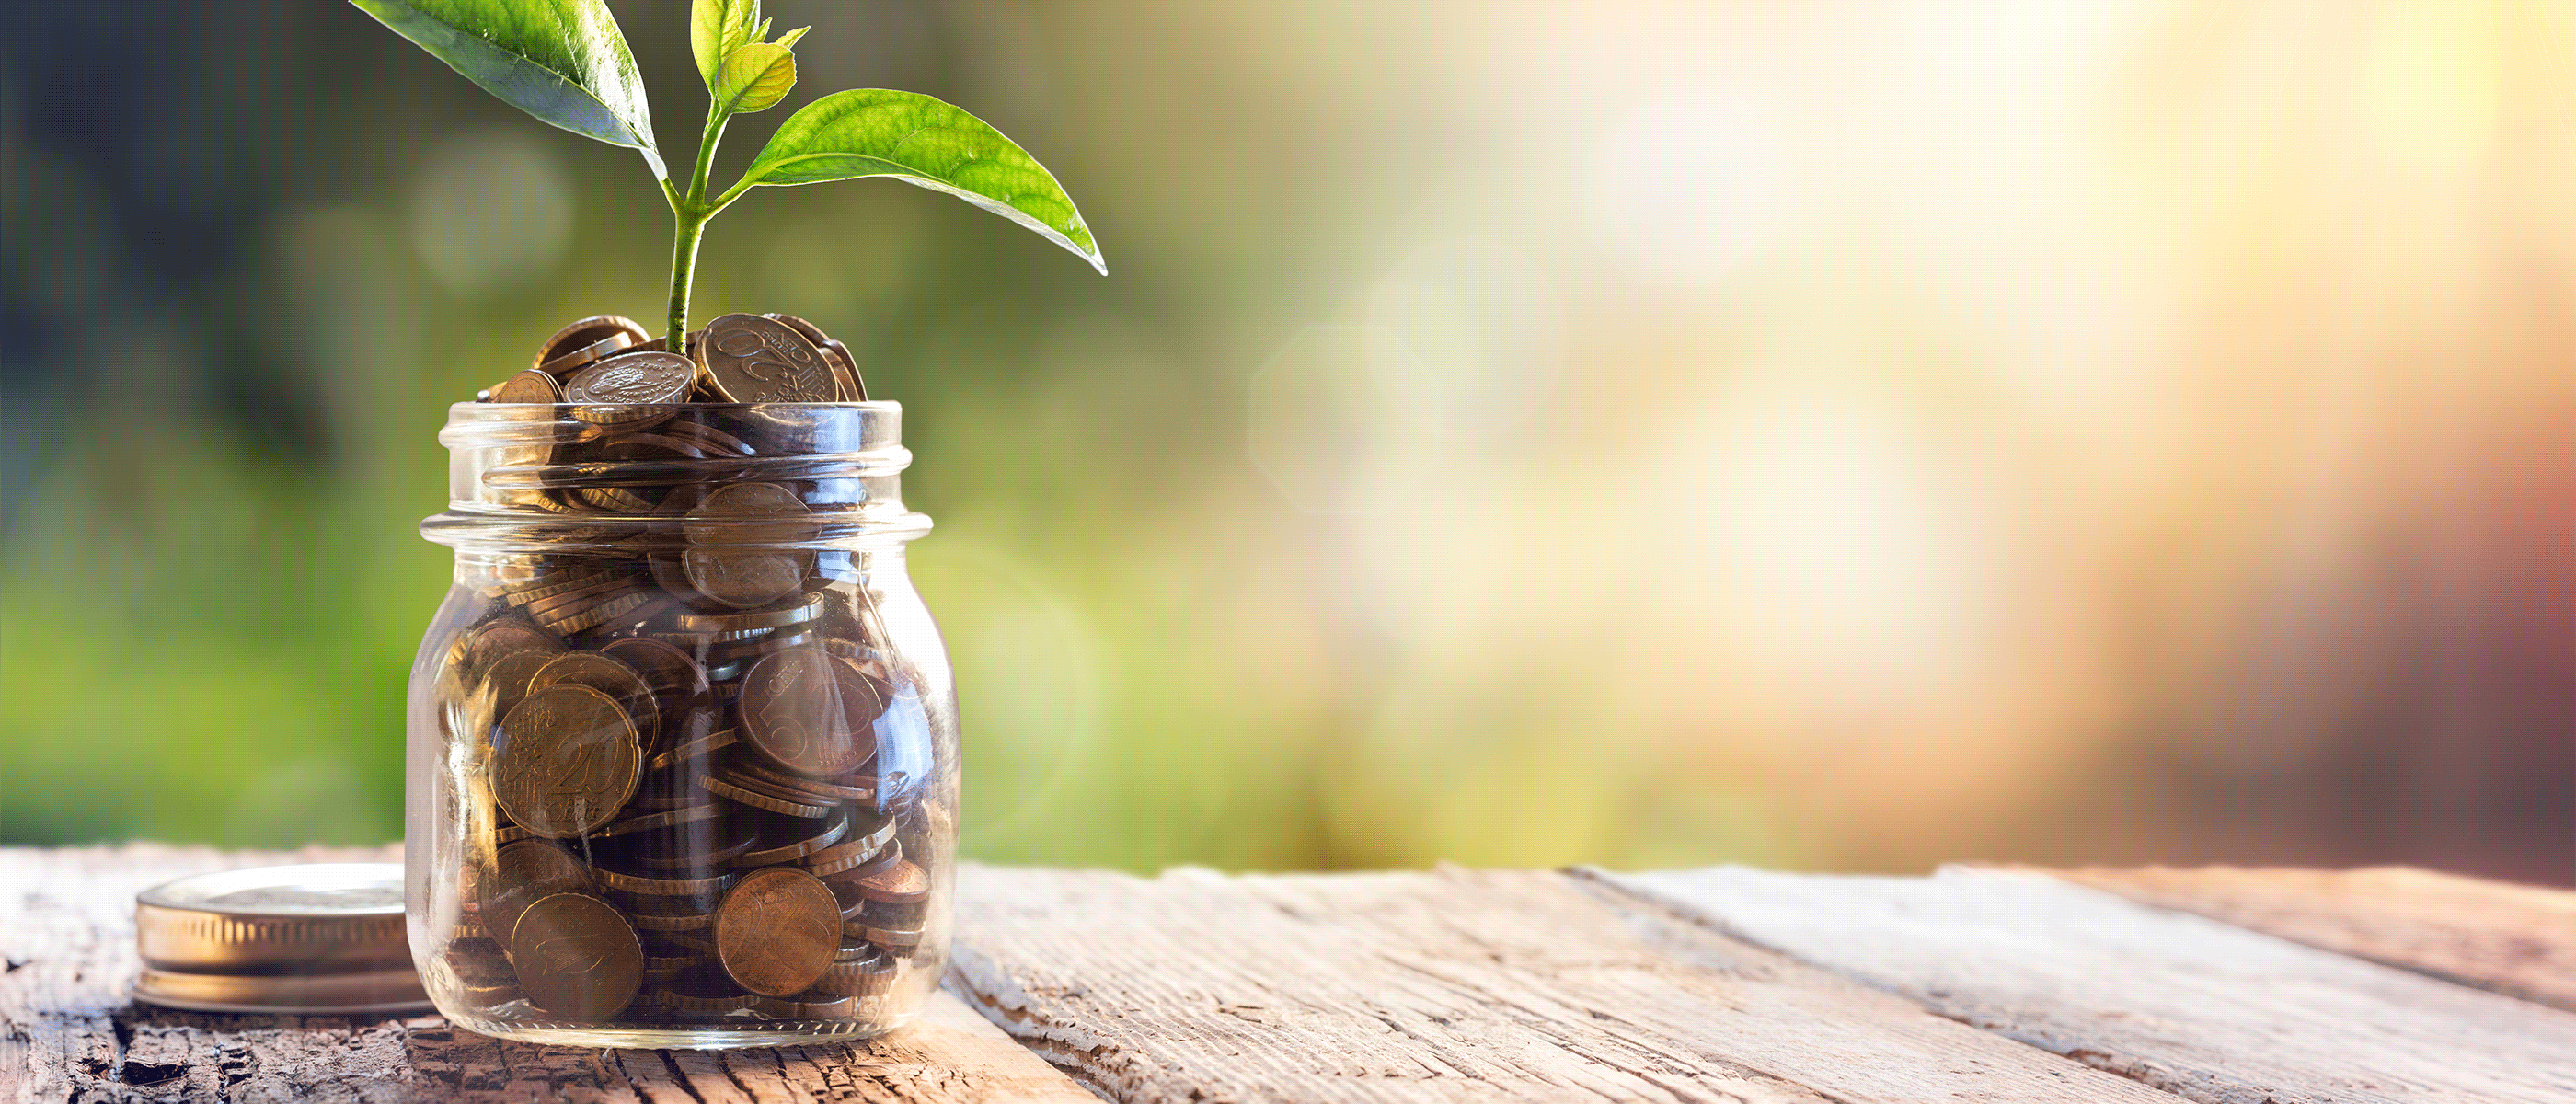 Small Jar with coins and a tree growing out of it